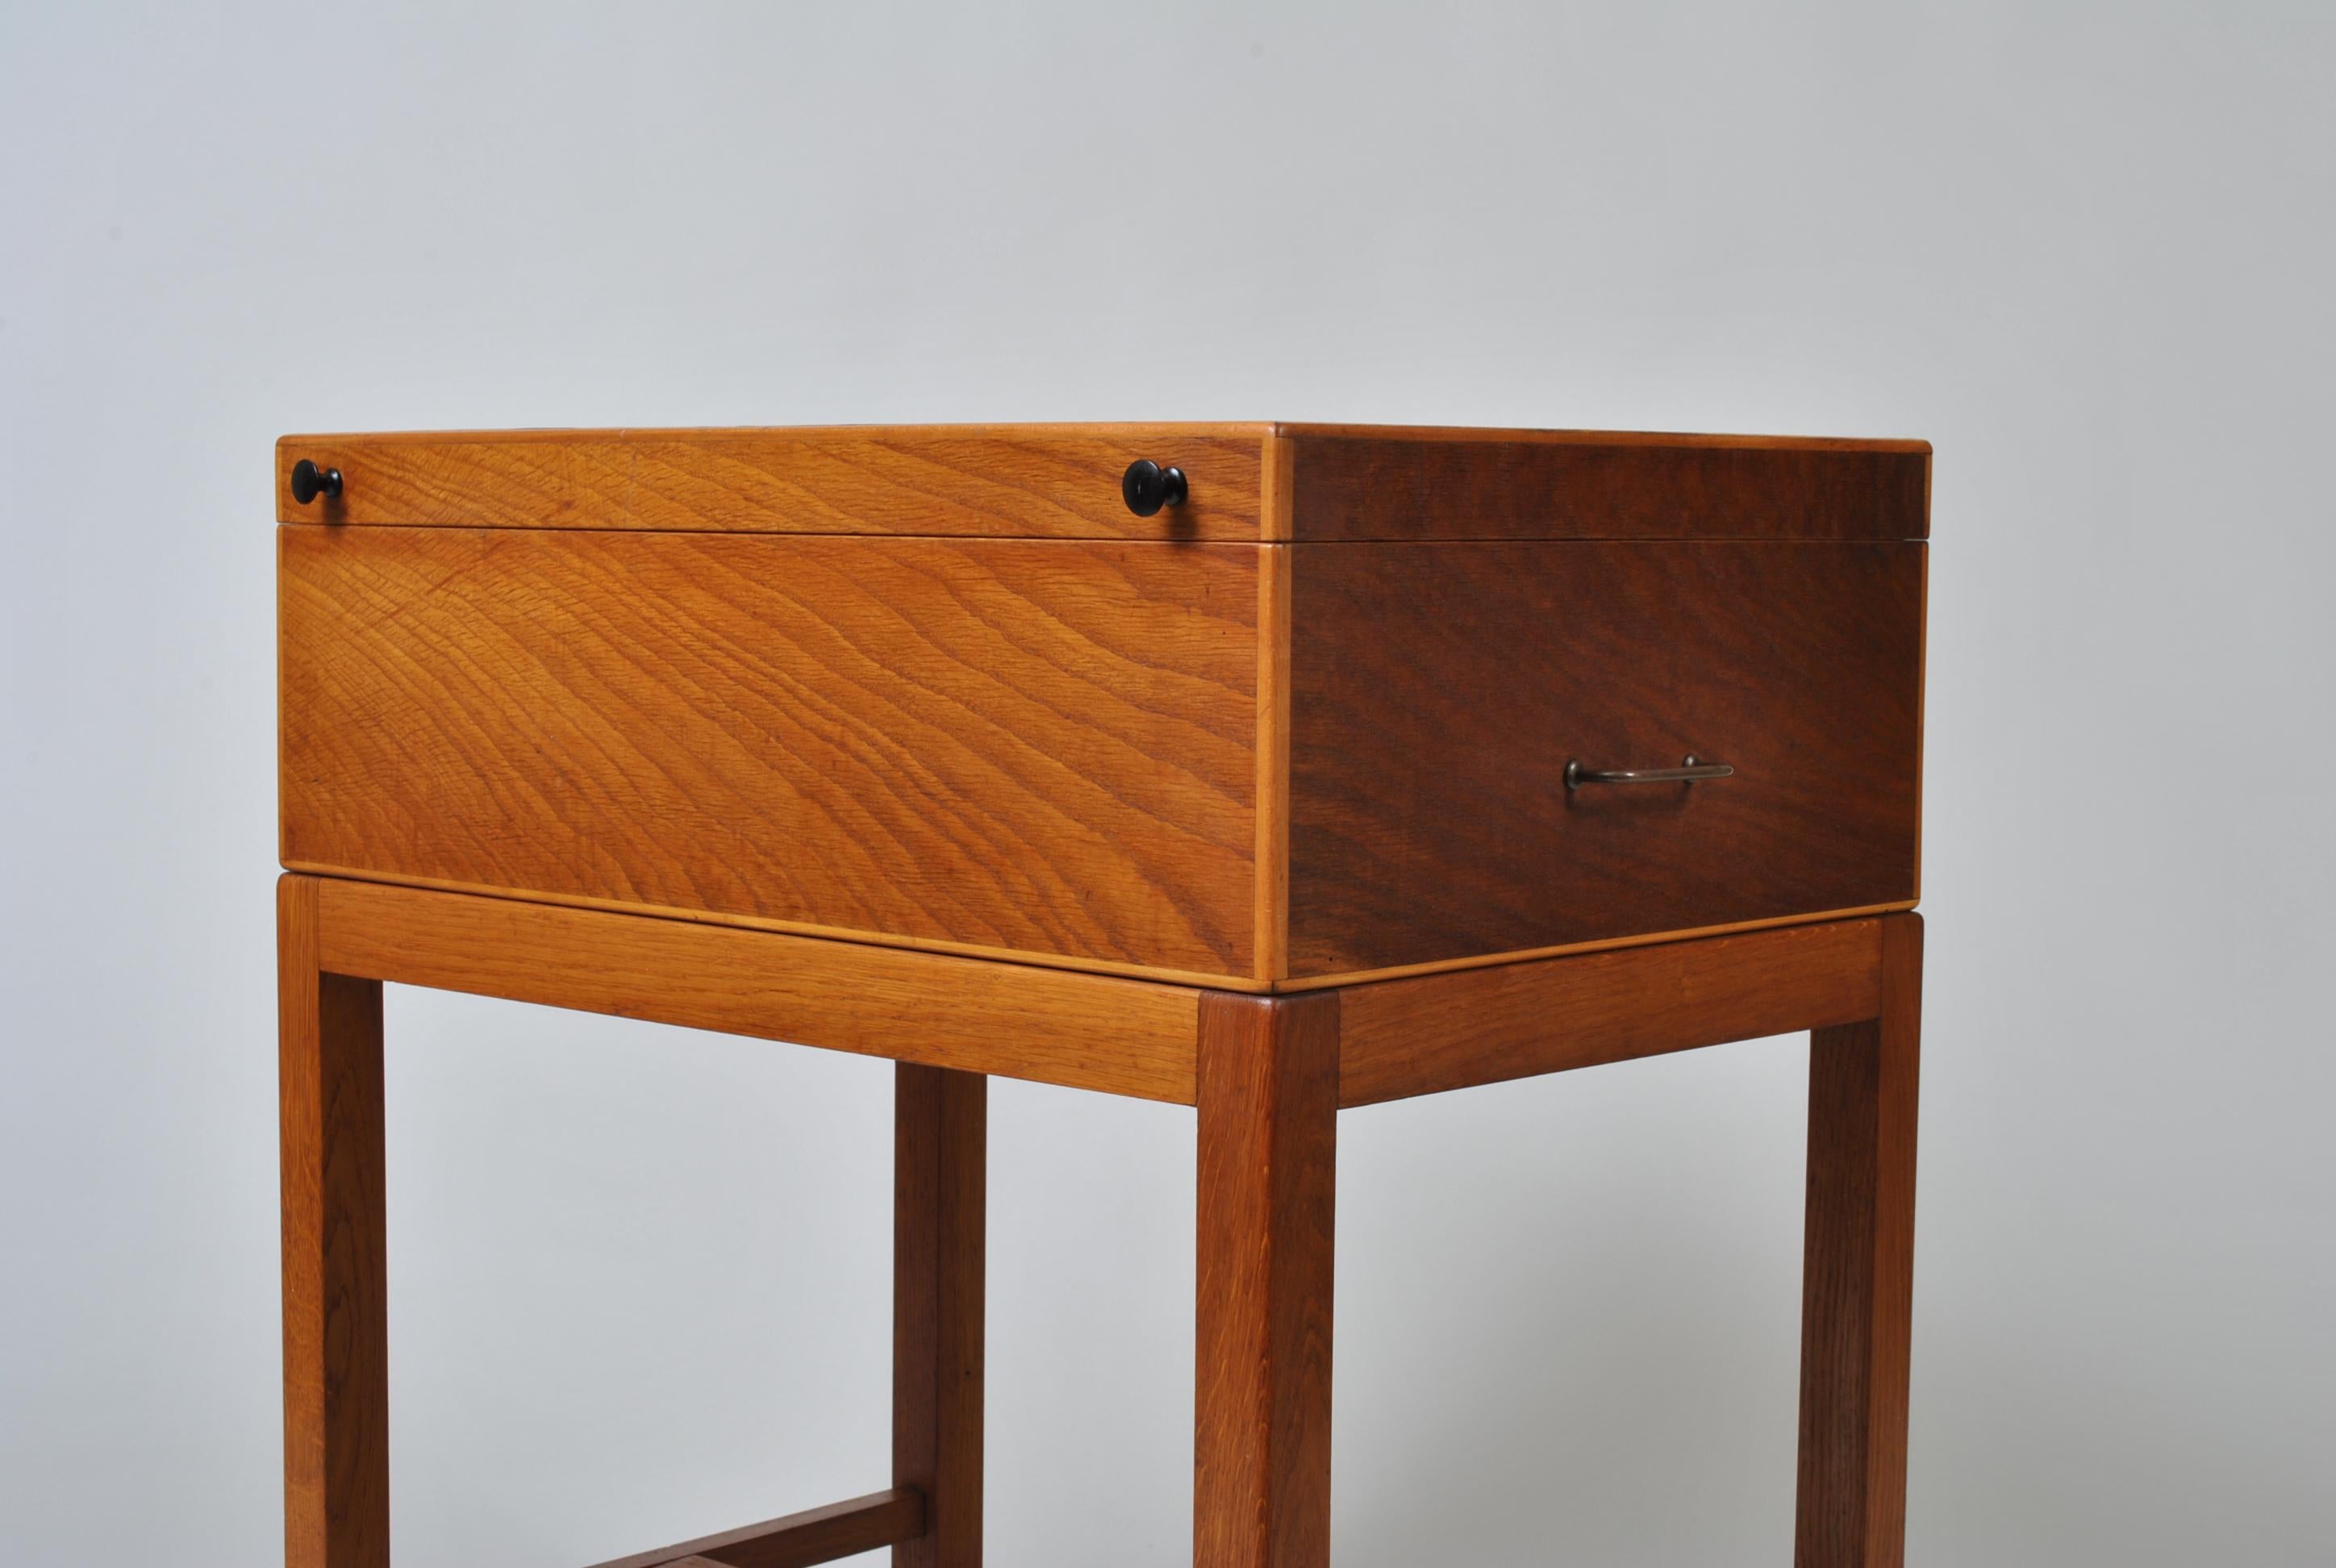 A rather unusual handcrafted oak box table. Danish, circa 1940-1950. Maple interior with removable compartment trays & storage beneath. Burr oak veneered top surface. Charming and practical hobby box or end/side/console table. 